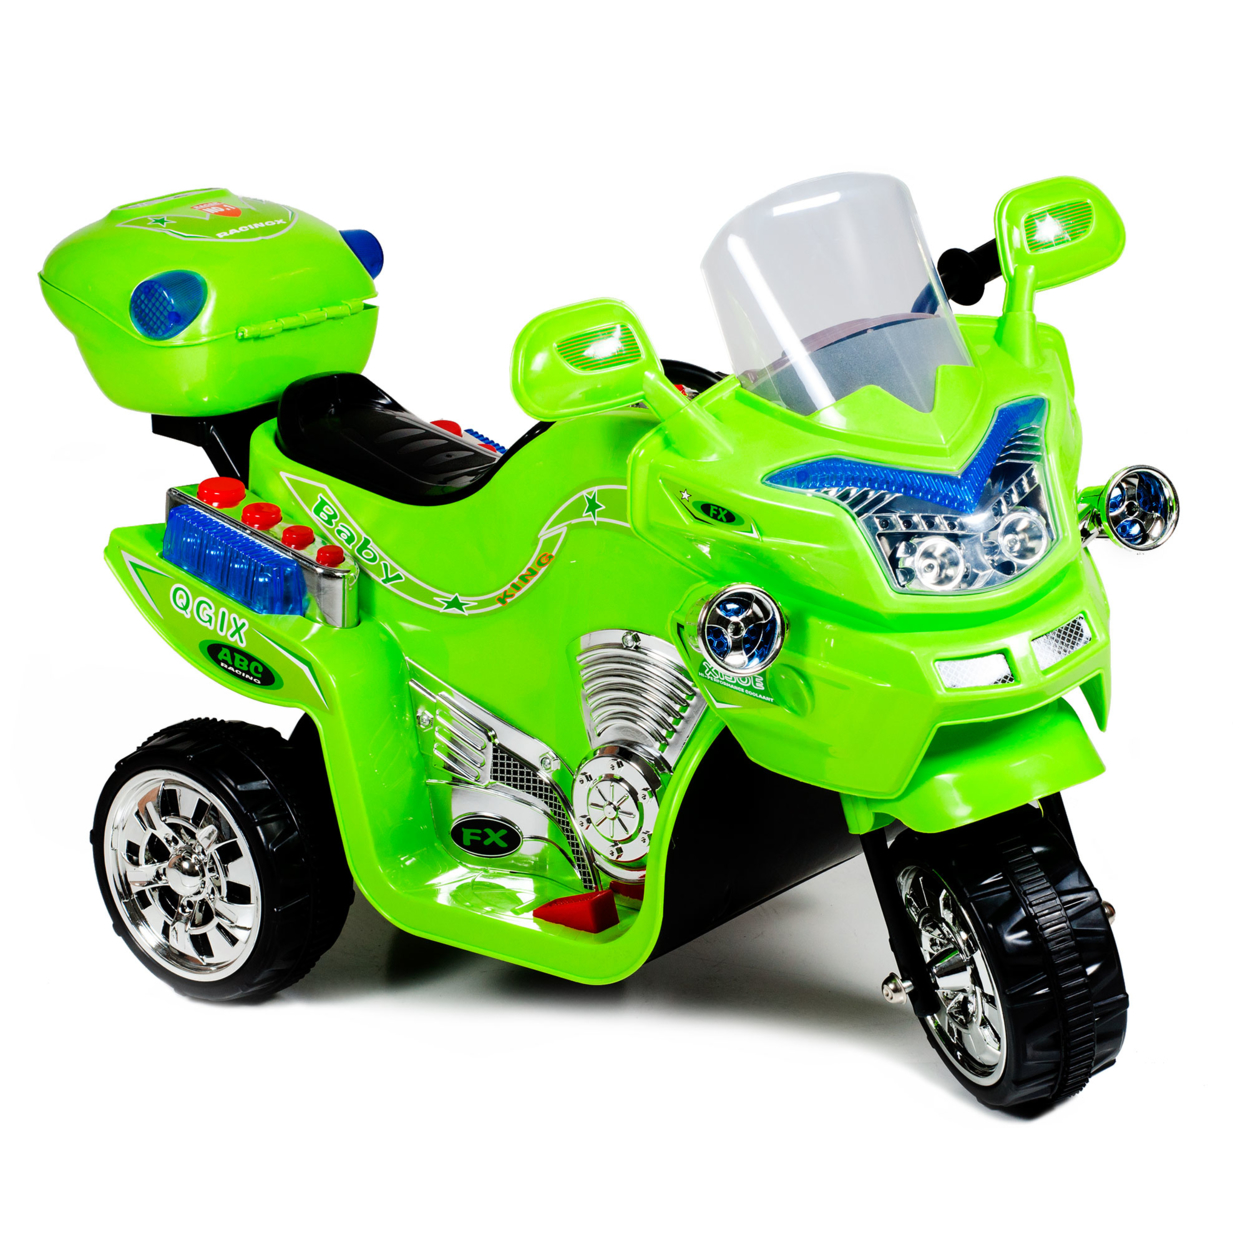 Lil' Rider FX 3 Wheel Motorcycle Battery Powered Bike - Green Ride On Toy 2-4 Years Old Toddler